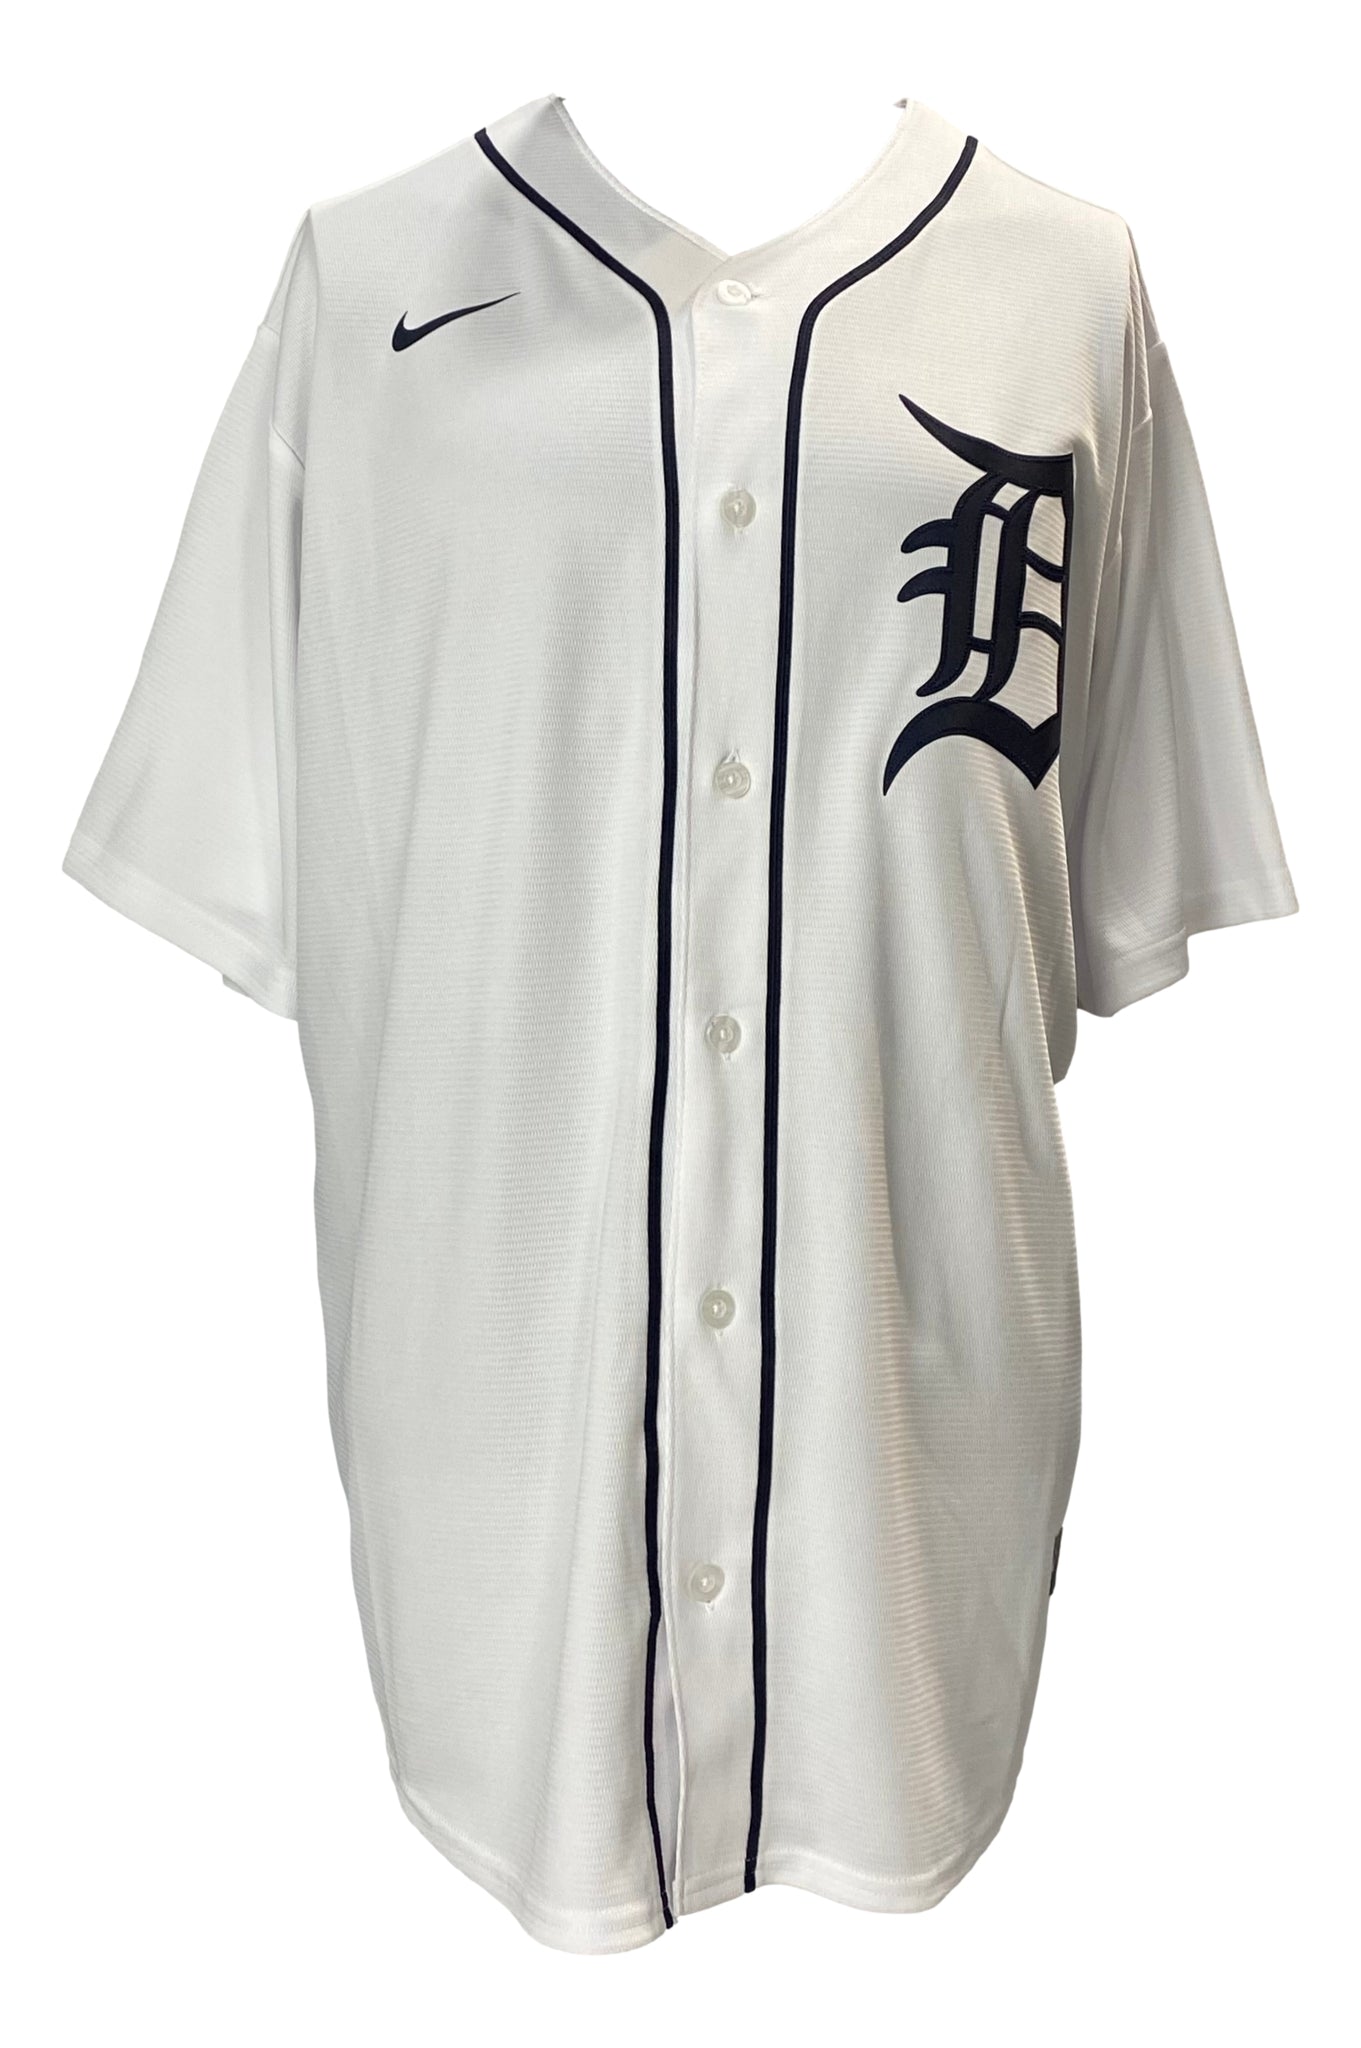 Miguel Cabrera Signed Detroit Tigers White Nike Baseball Jersey BAS IT –  Sports Integrity